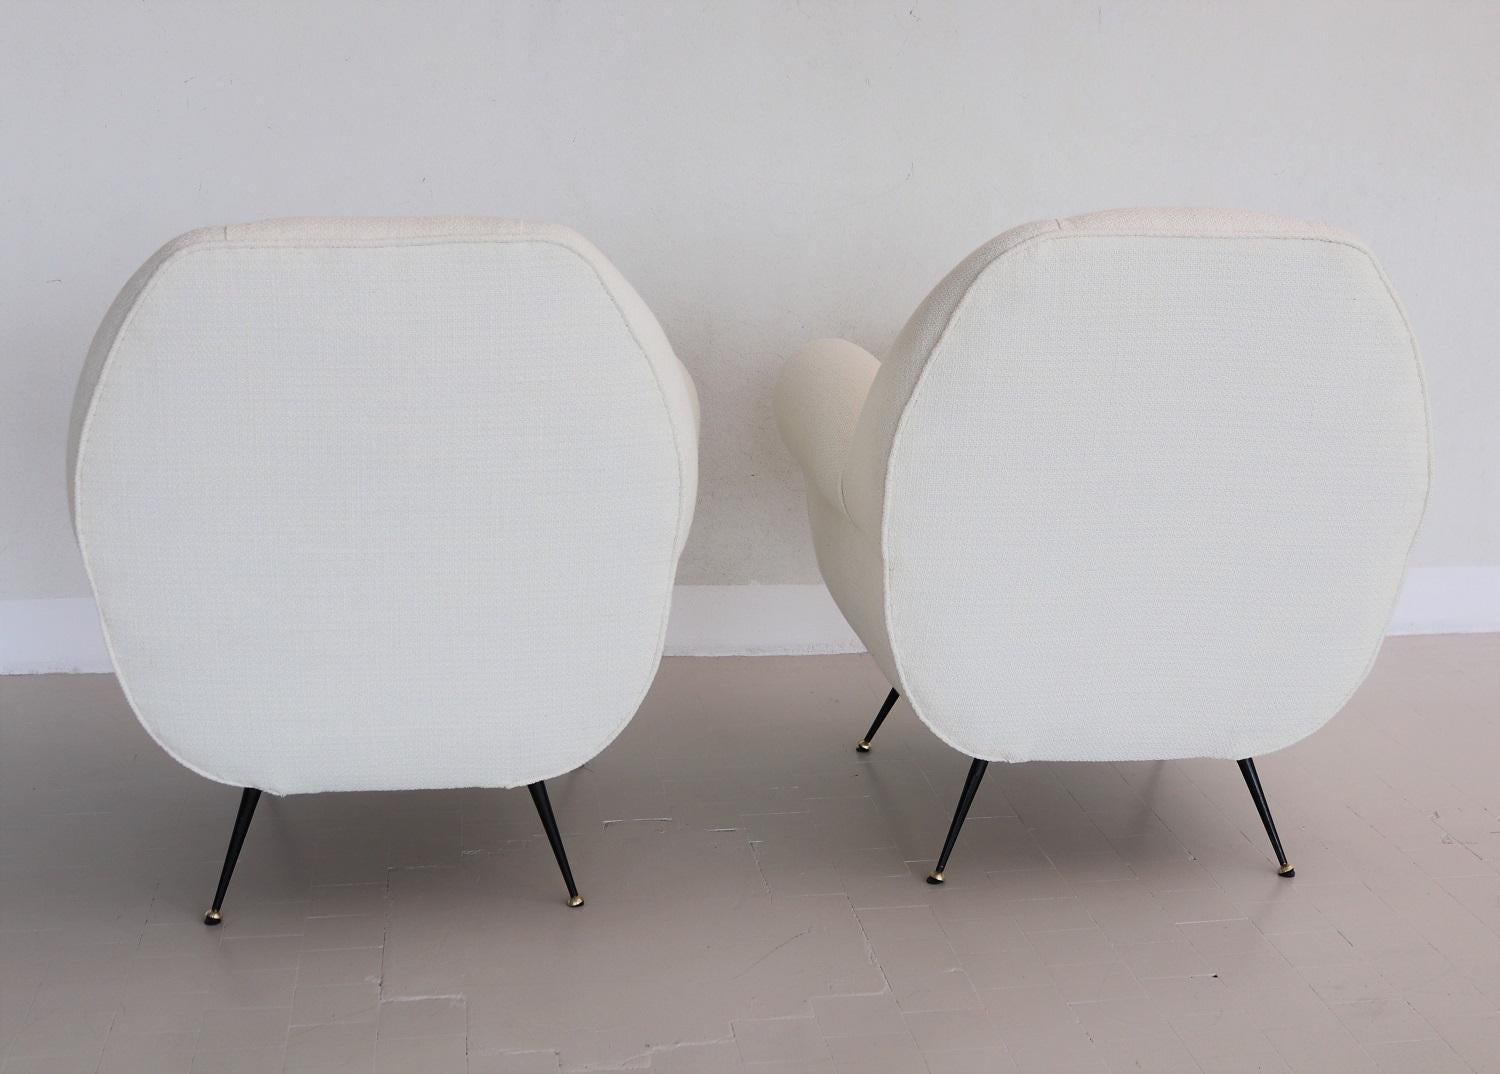 Italian Midcentury Armchairs in White Upholstery and Brass Stiletto Feet, 1960s For Sale 6